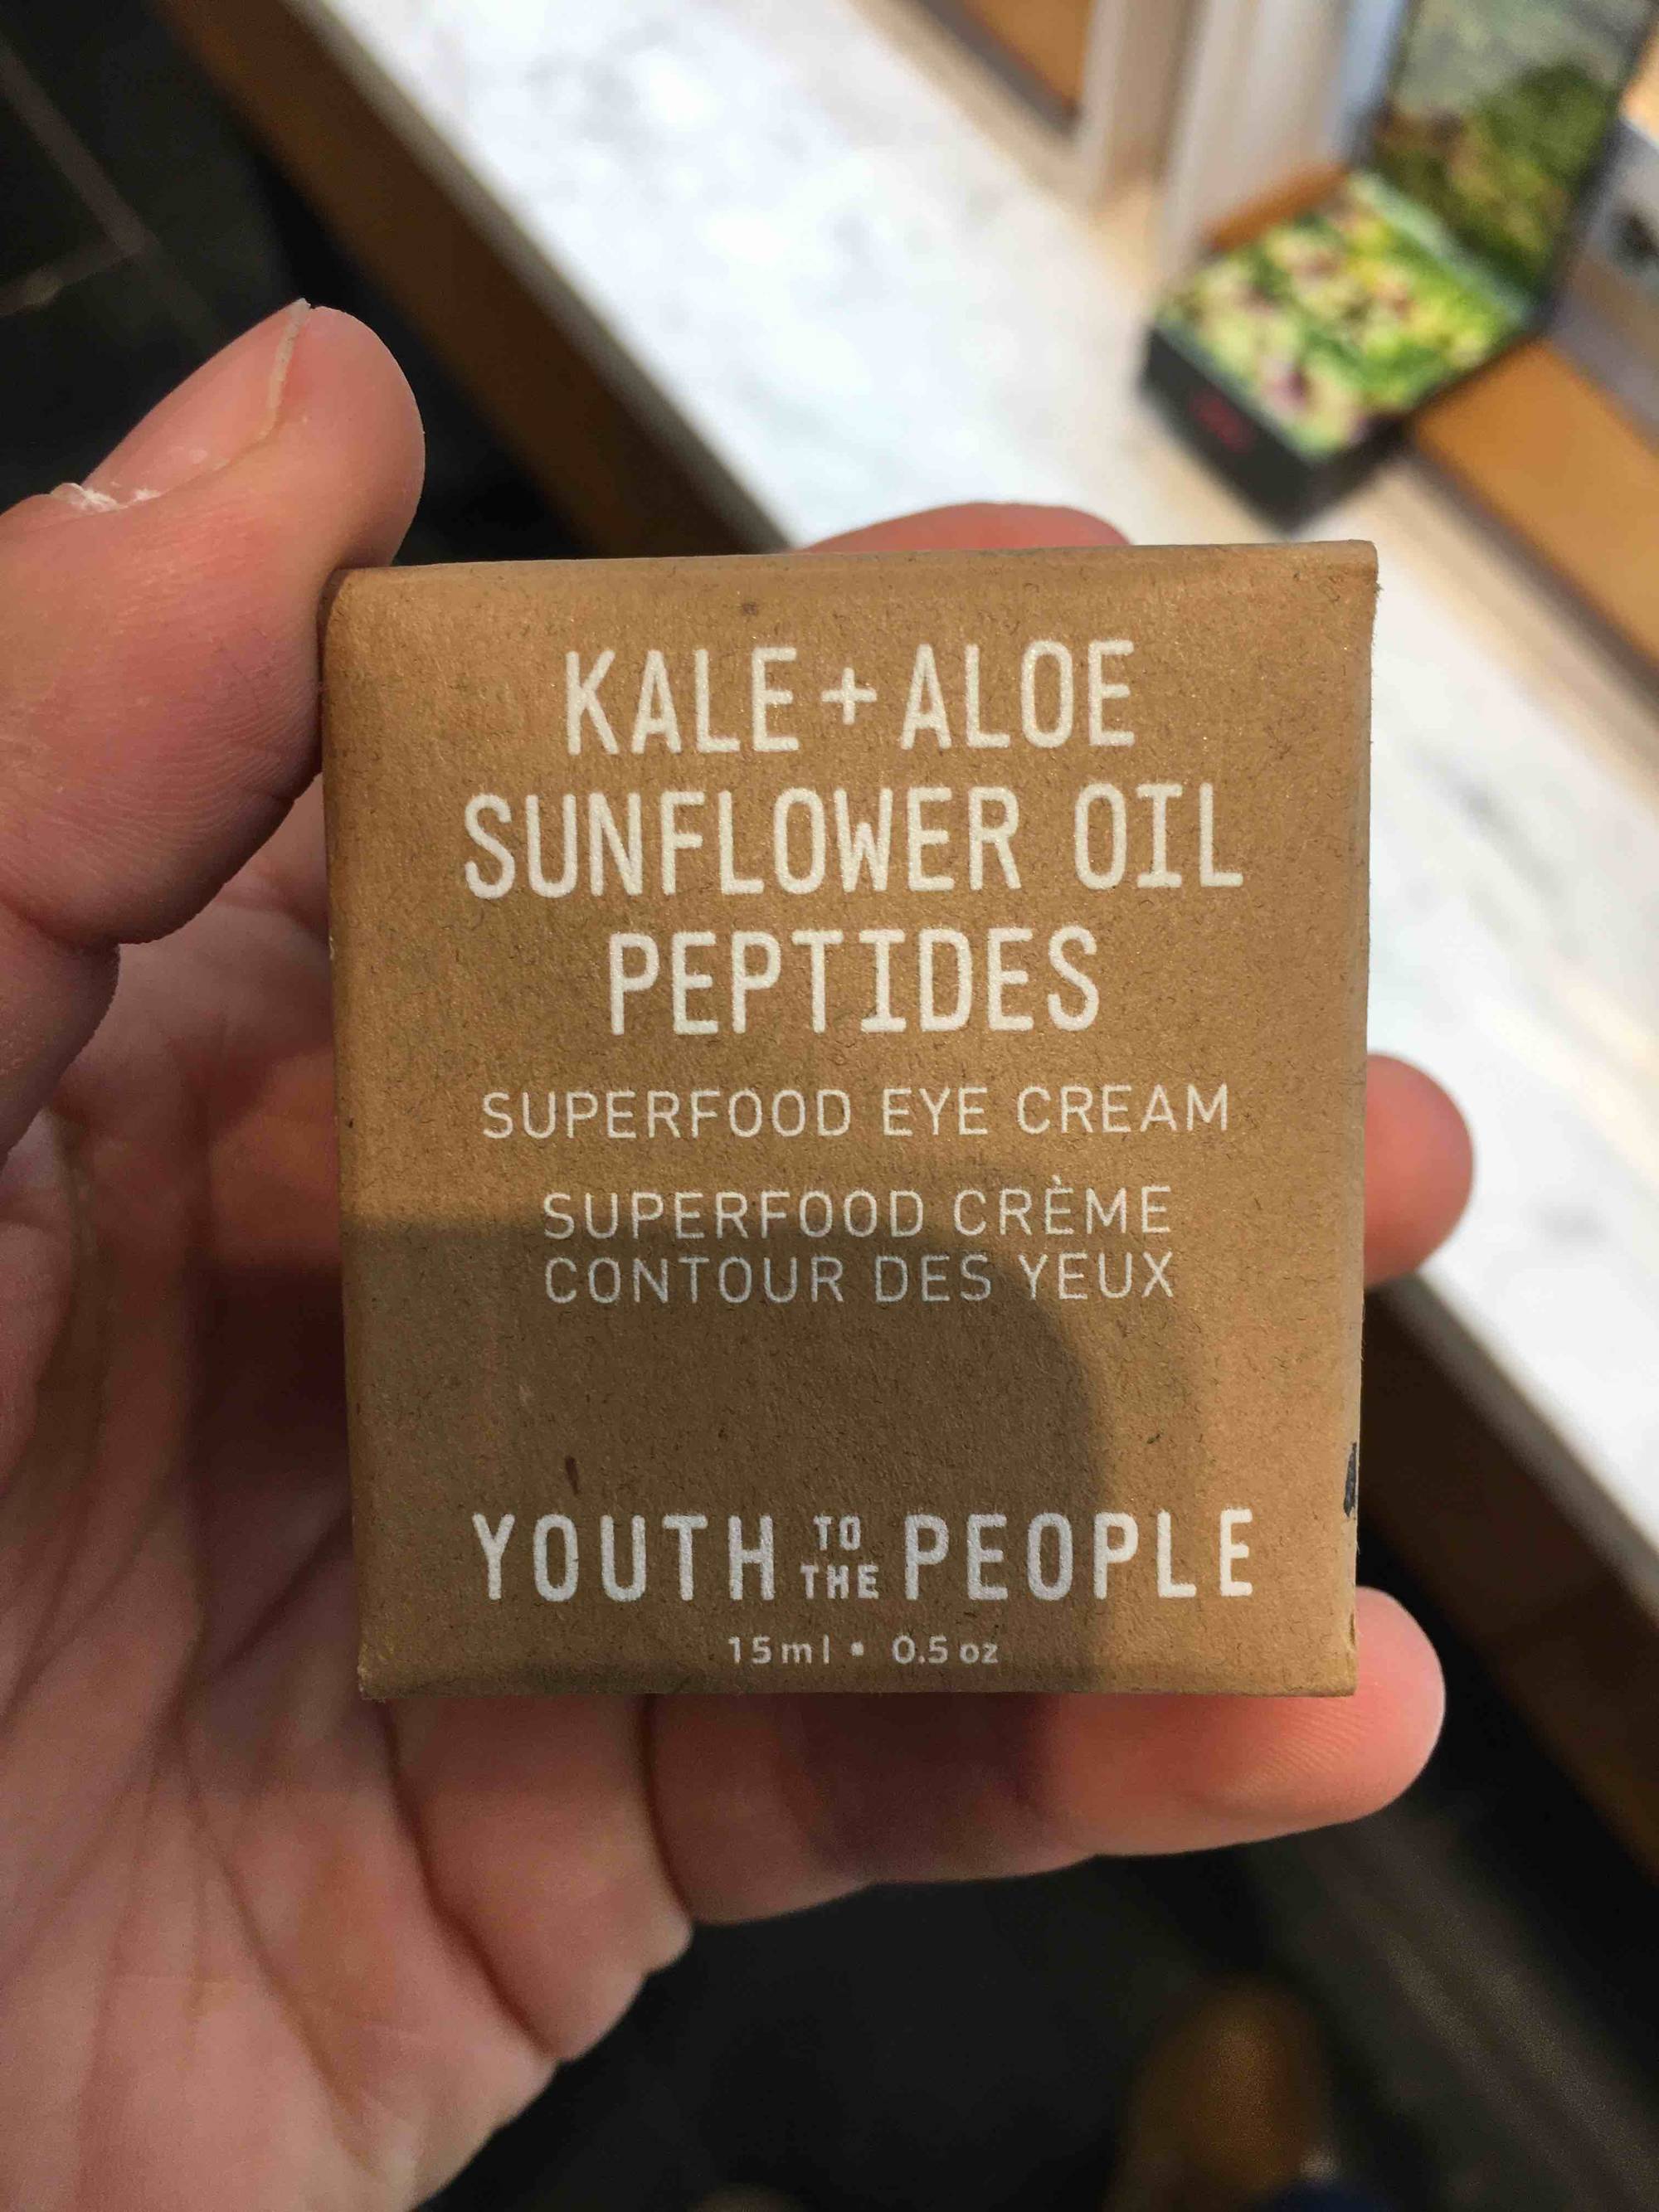 YOUTH TO THE PEOPLE - Superfood crème contour des yeux